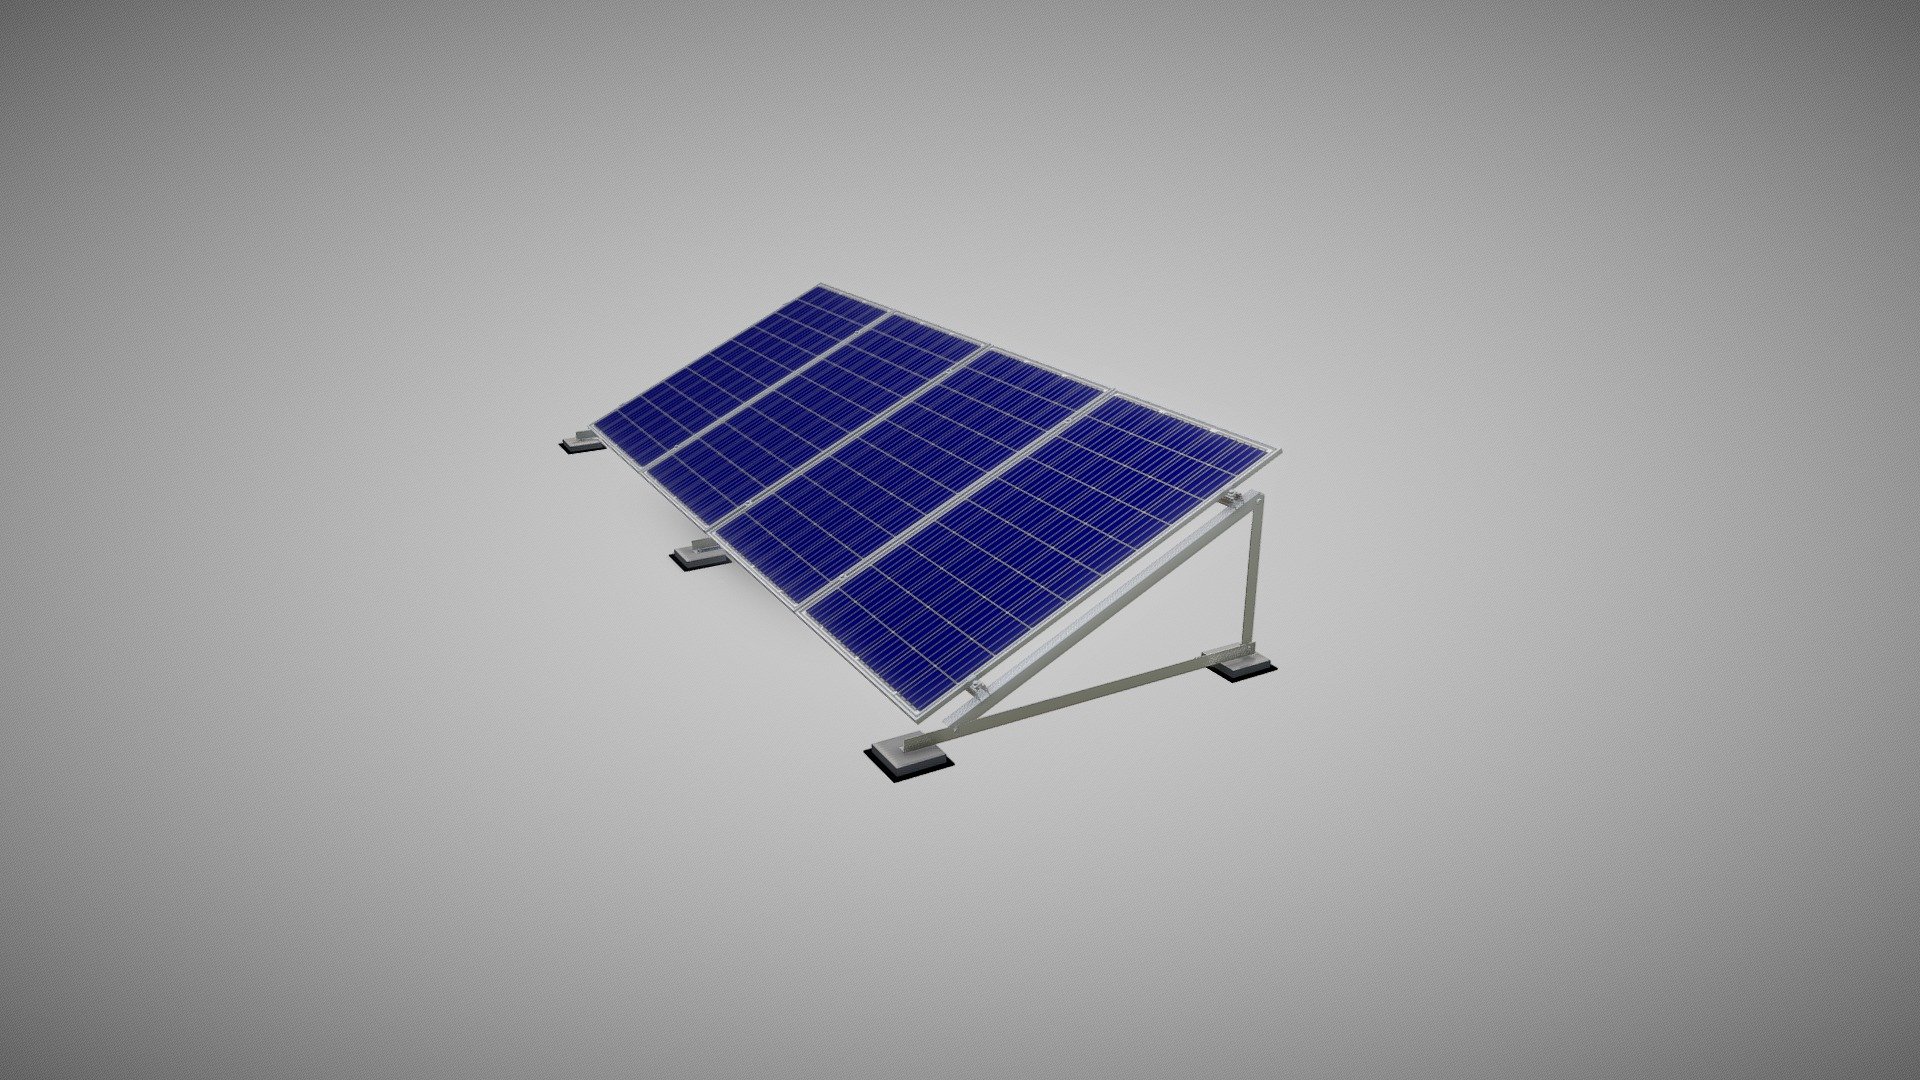 **KRAFT Solergy Company - frame structures for PV solar power plants manufacturer. **

The Model R2V2 PV solar power plant frame is a basic version of the frame for mounting solar cells on the roof with a vertical arrangement of photovoltaic elements. The basic parameters are calculated at the design stage according to the specific requirements of the customer.
Size range of PV solar panels: 1650-2400 mm in height, 990-1149 mm in width.
The Model R2V2 PV solar power plant frame is made of high-quality galvanized steel. The main element of the design is a triangular frame. The structure is installed on the roof using a ballast attachment.
Row material - Ry - 230 MPa, 350 MPa, 450 MPa steel with yield strenght (Ry not less than 230 mPa, 350 mPa, 450 mPa) according to EN 10025-2 and EN 10346 galvanized.
Anti-corrosion protection of the frame elements is provided by the factory galvanic coating of the construction material, a zinc layer of at least 275-600 g/m2 3d model